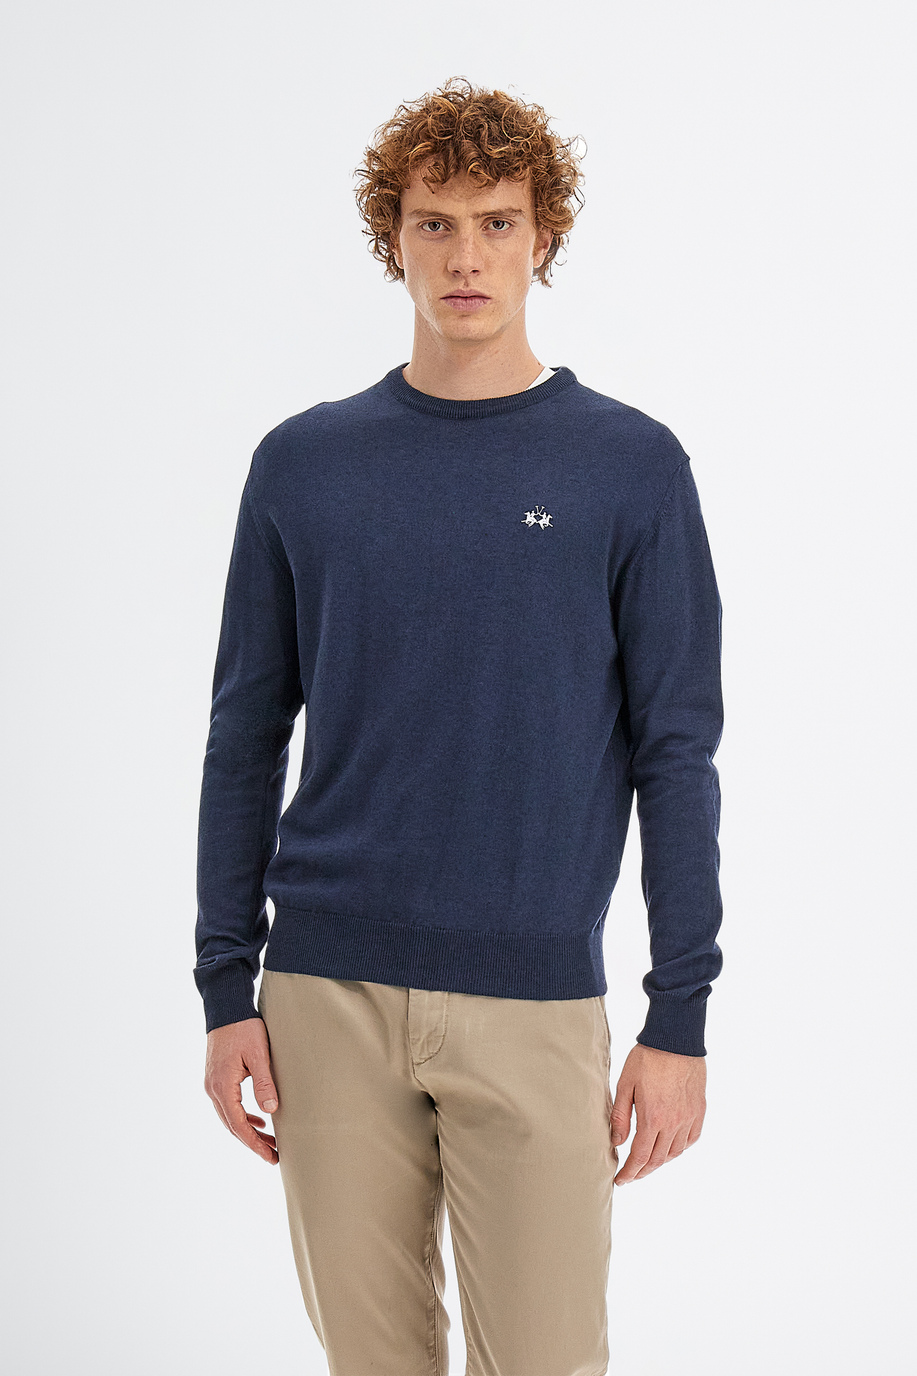 Men’s knitted sweater with long sleeves in cotton and wool blend regular fit - Knitwear | La Martina - Official Online Shop